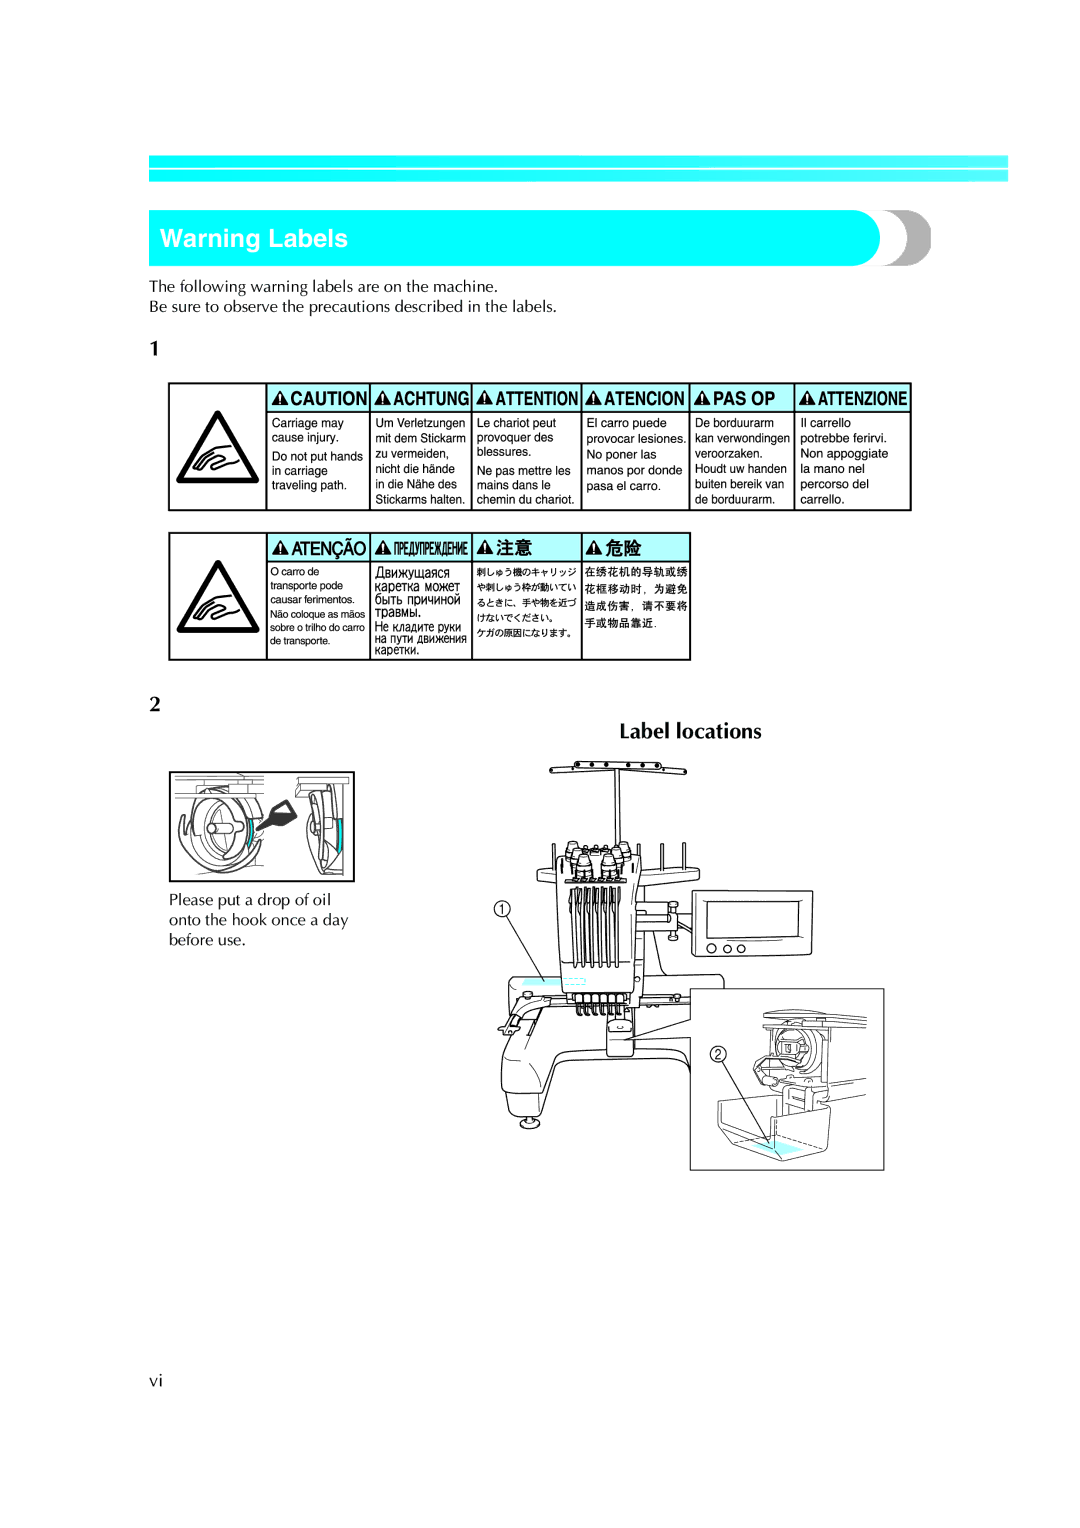 Brother PE-600II operation manual Label locations 